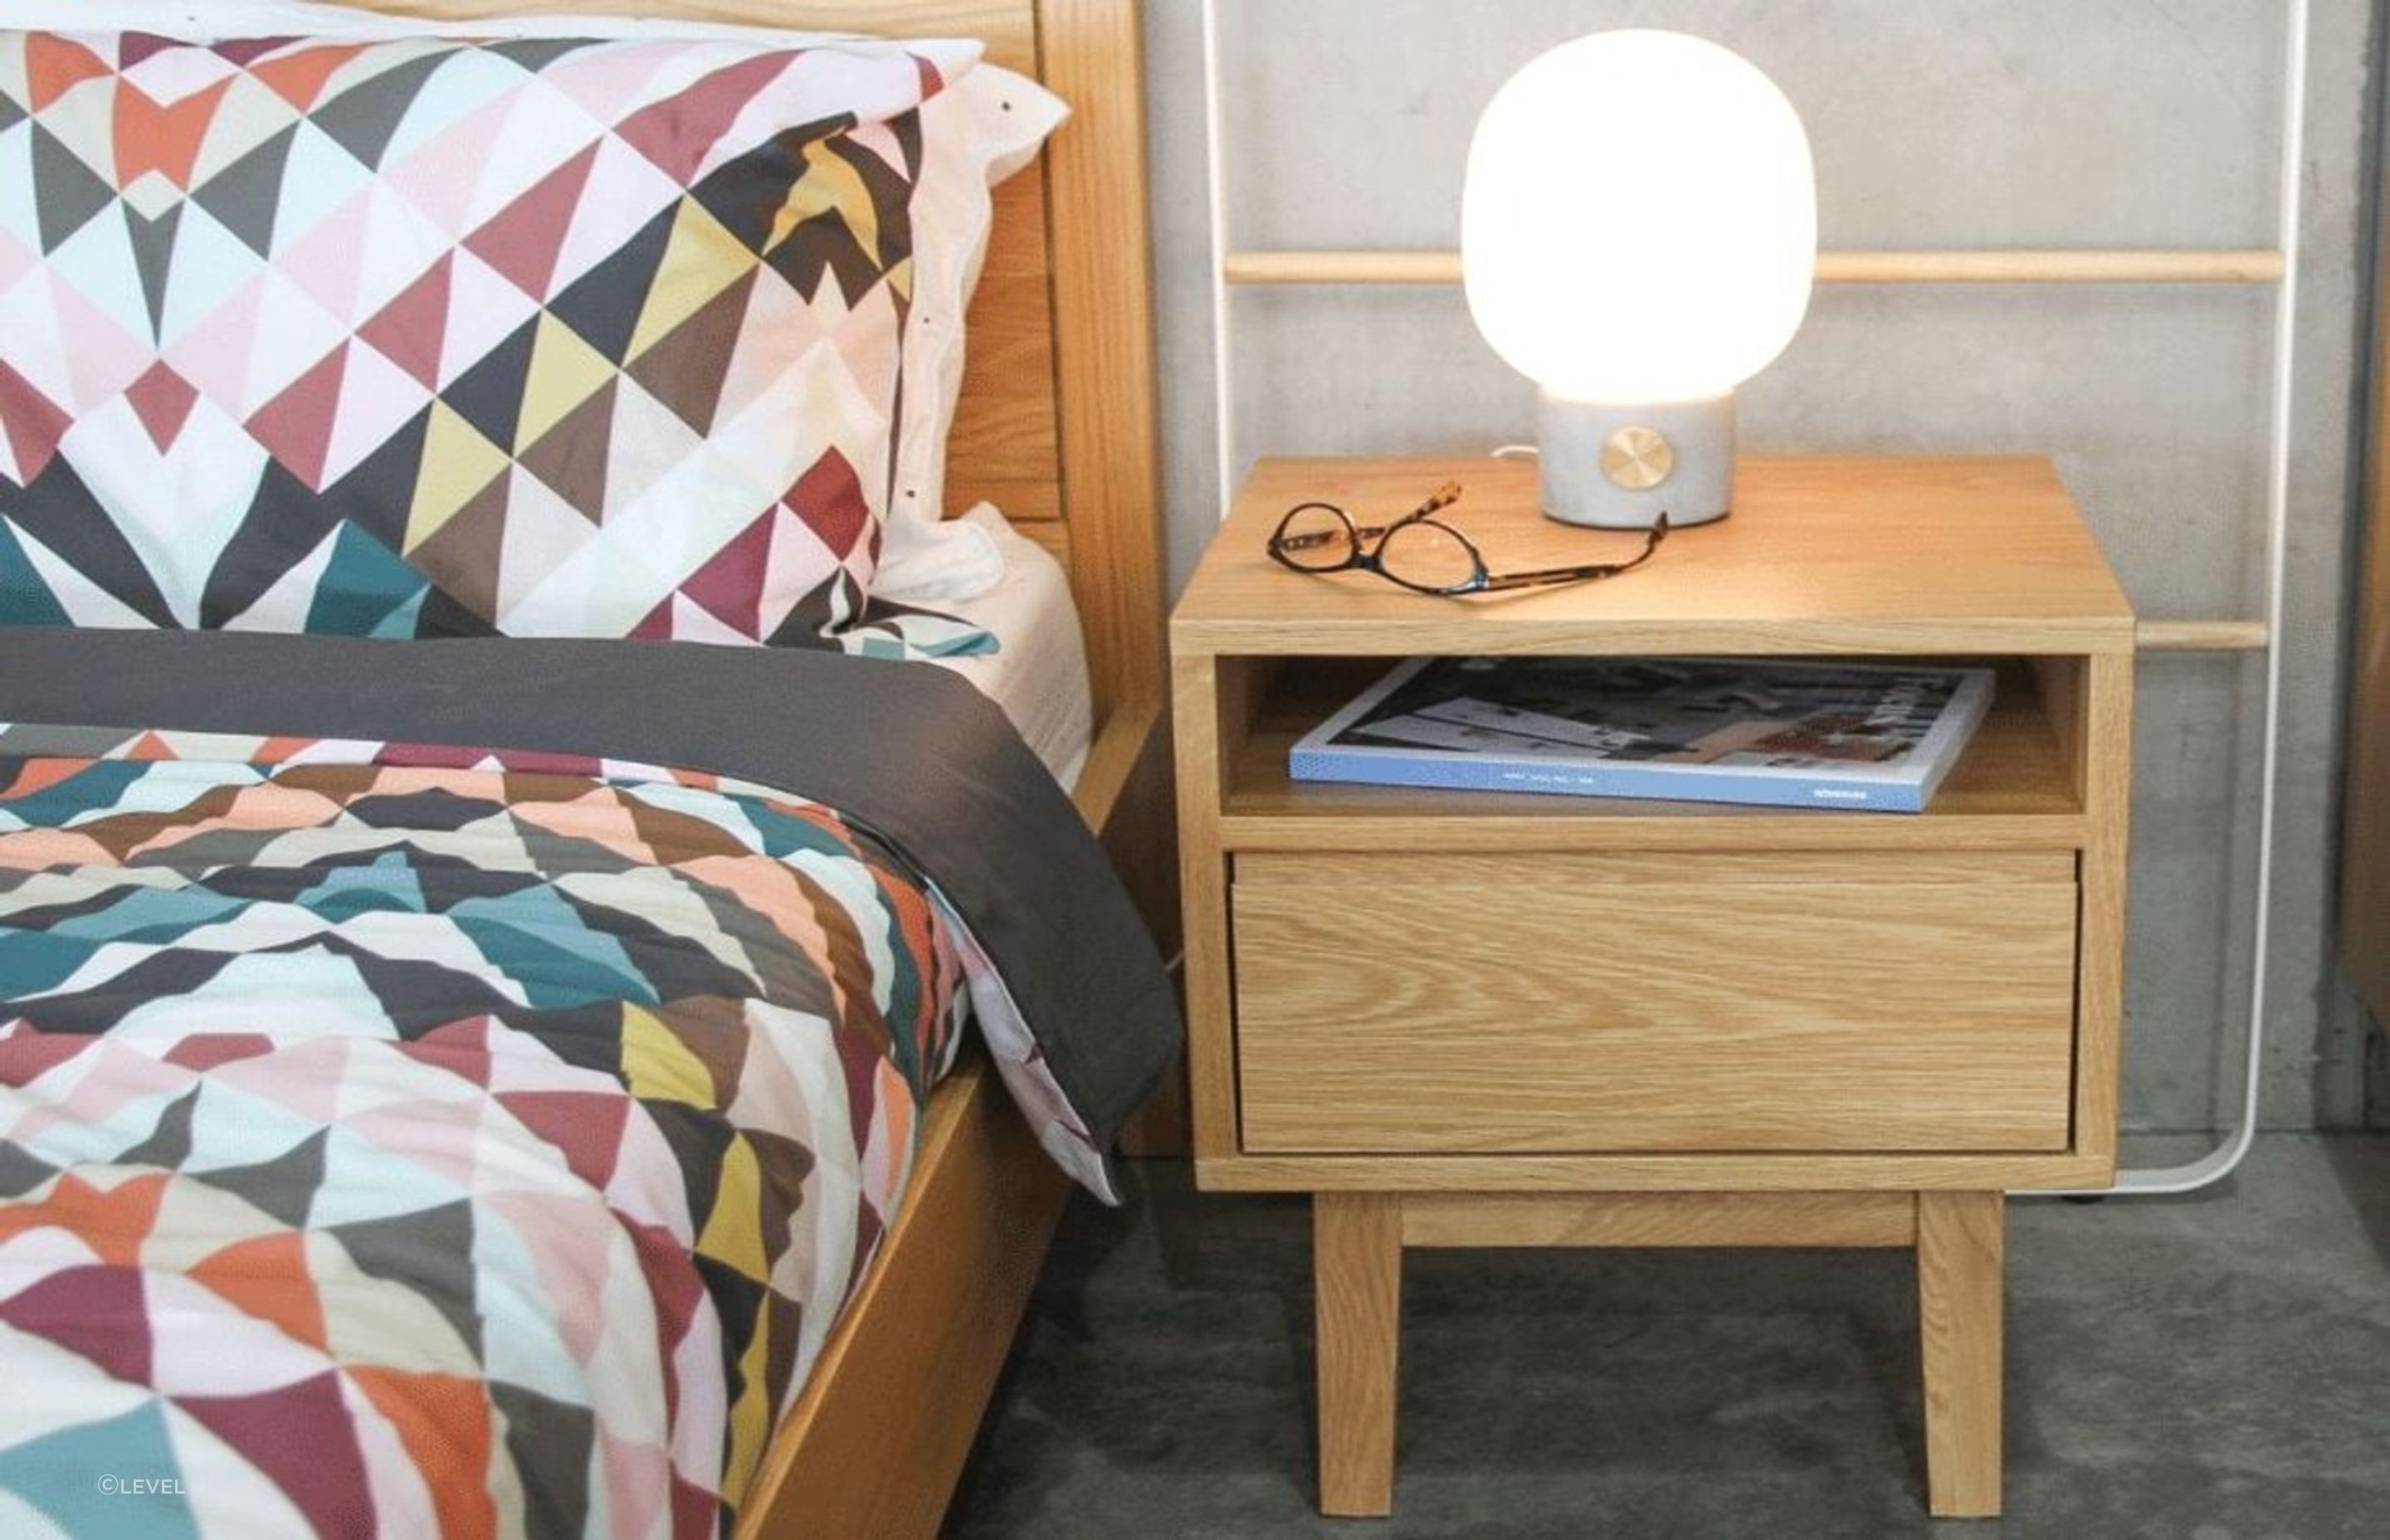 Store personal items such as your glasses and your evening read with ease. Featured product: Copenhagen Square Bedside Table.